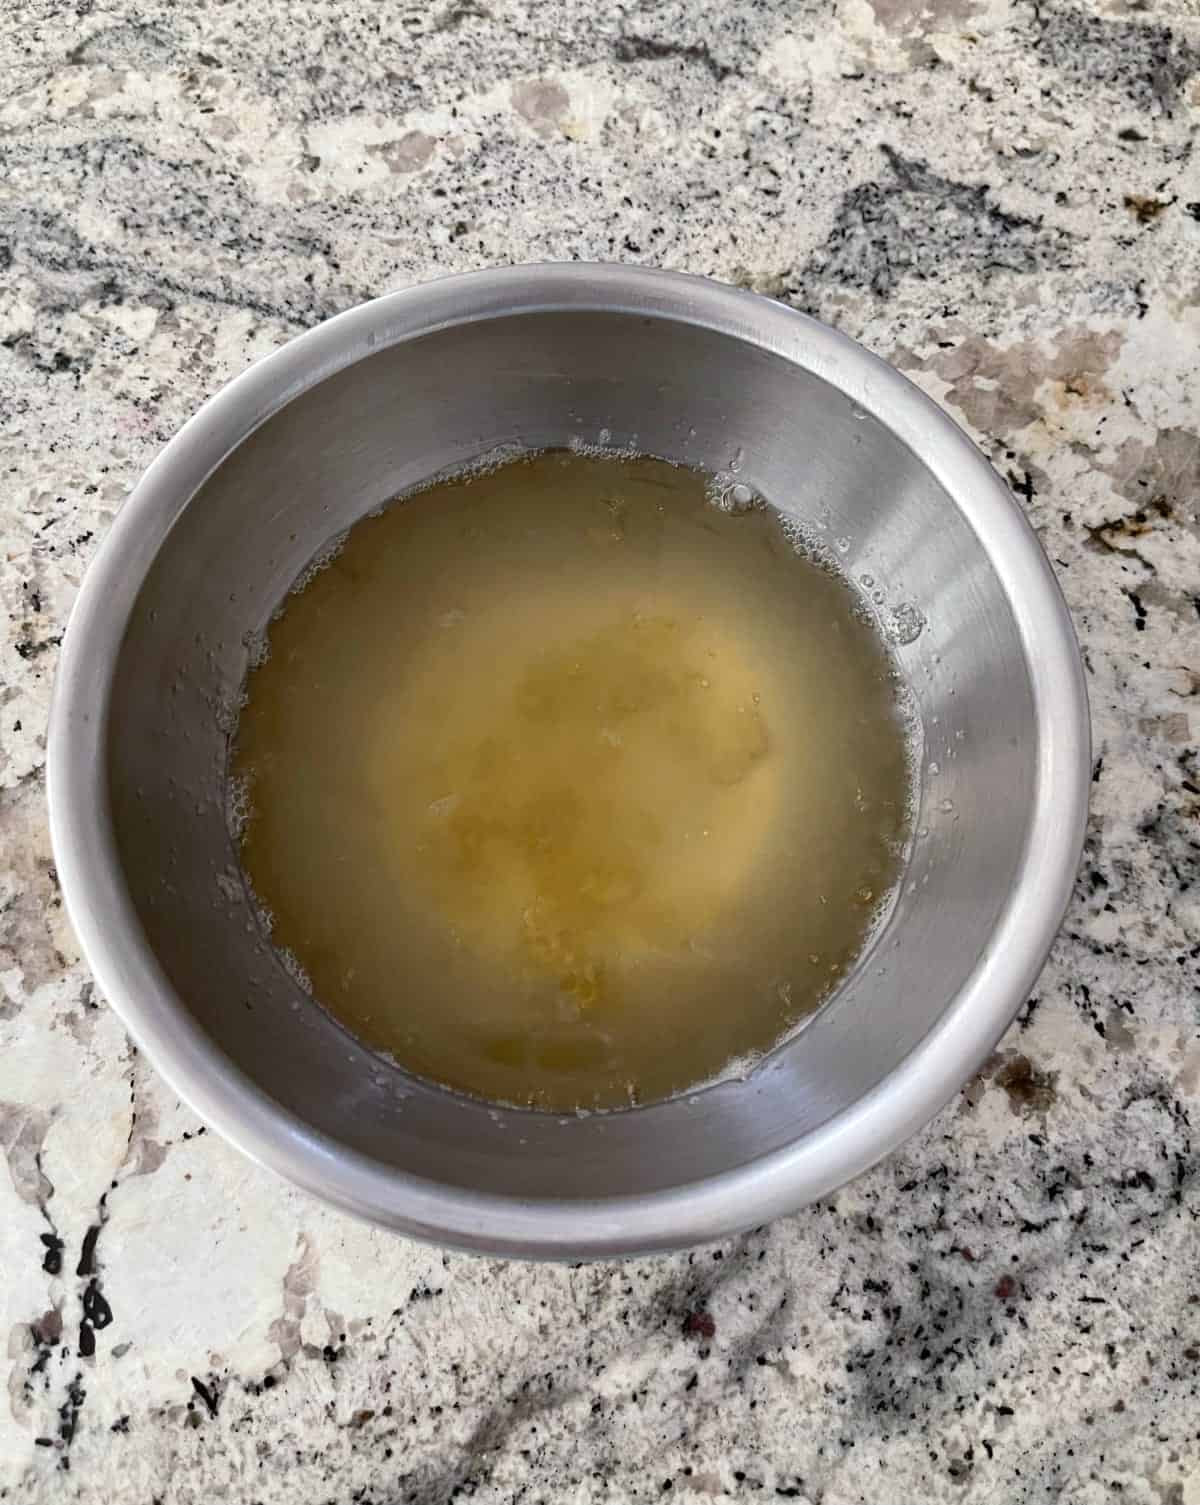 Softening unflavored gelatin in stainless mixing bowl.